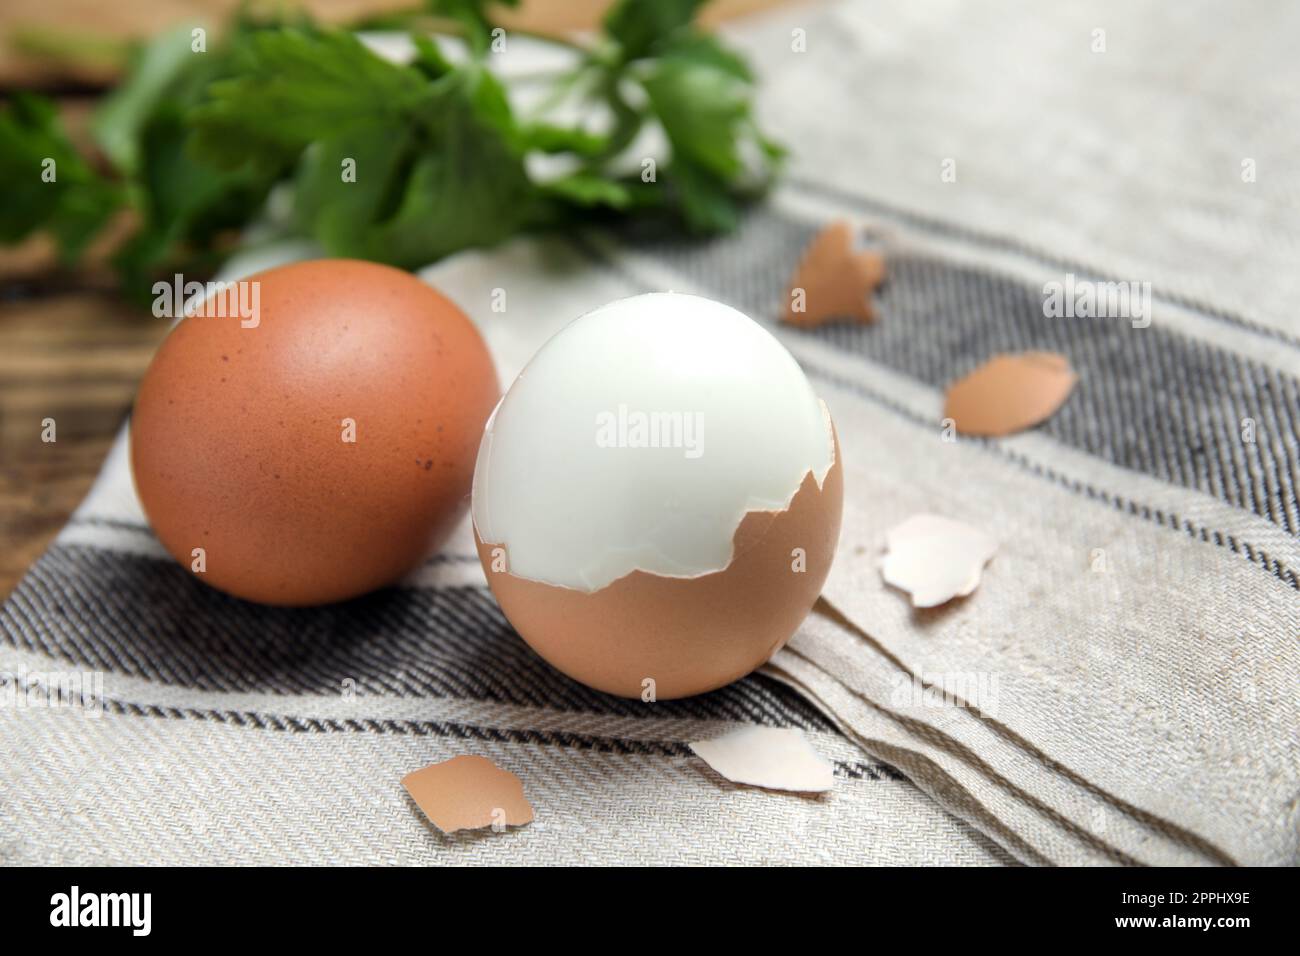 Boiled eggs and pieces of shell on kitchen towel, closeup Stock Photo